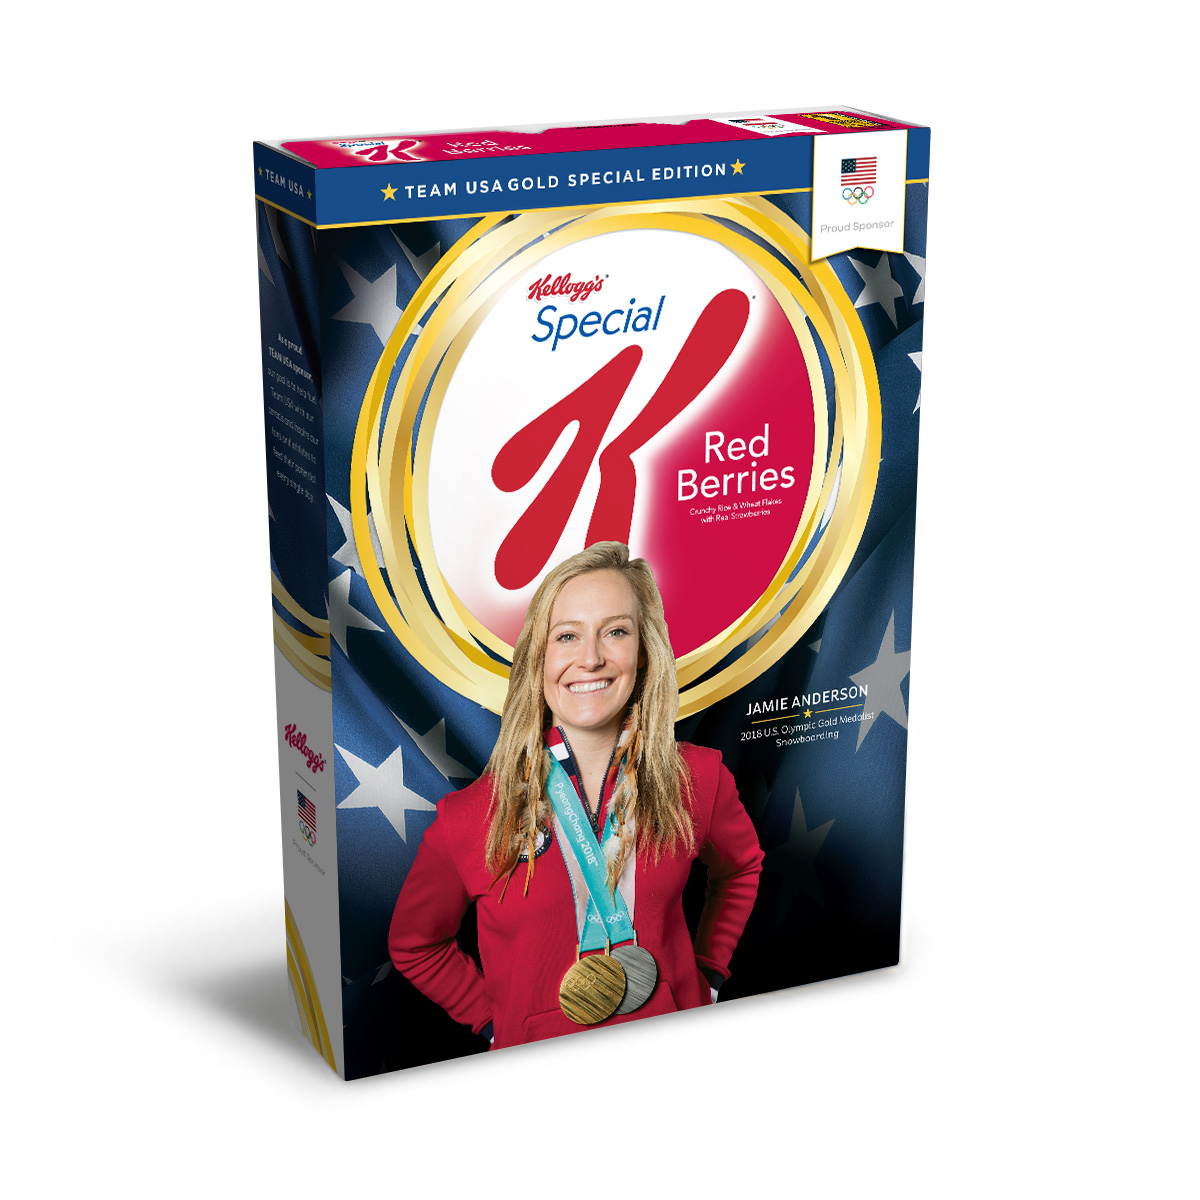 Jamie Anderson's Gold Medal Edition Kellogg's® Special K® Red Berries Box